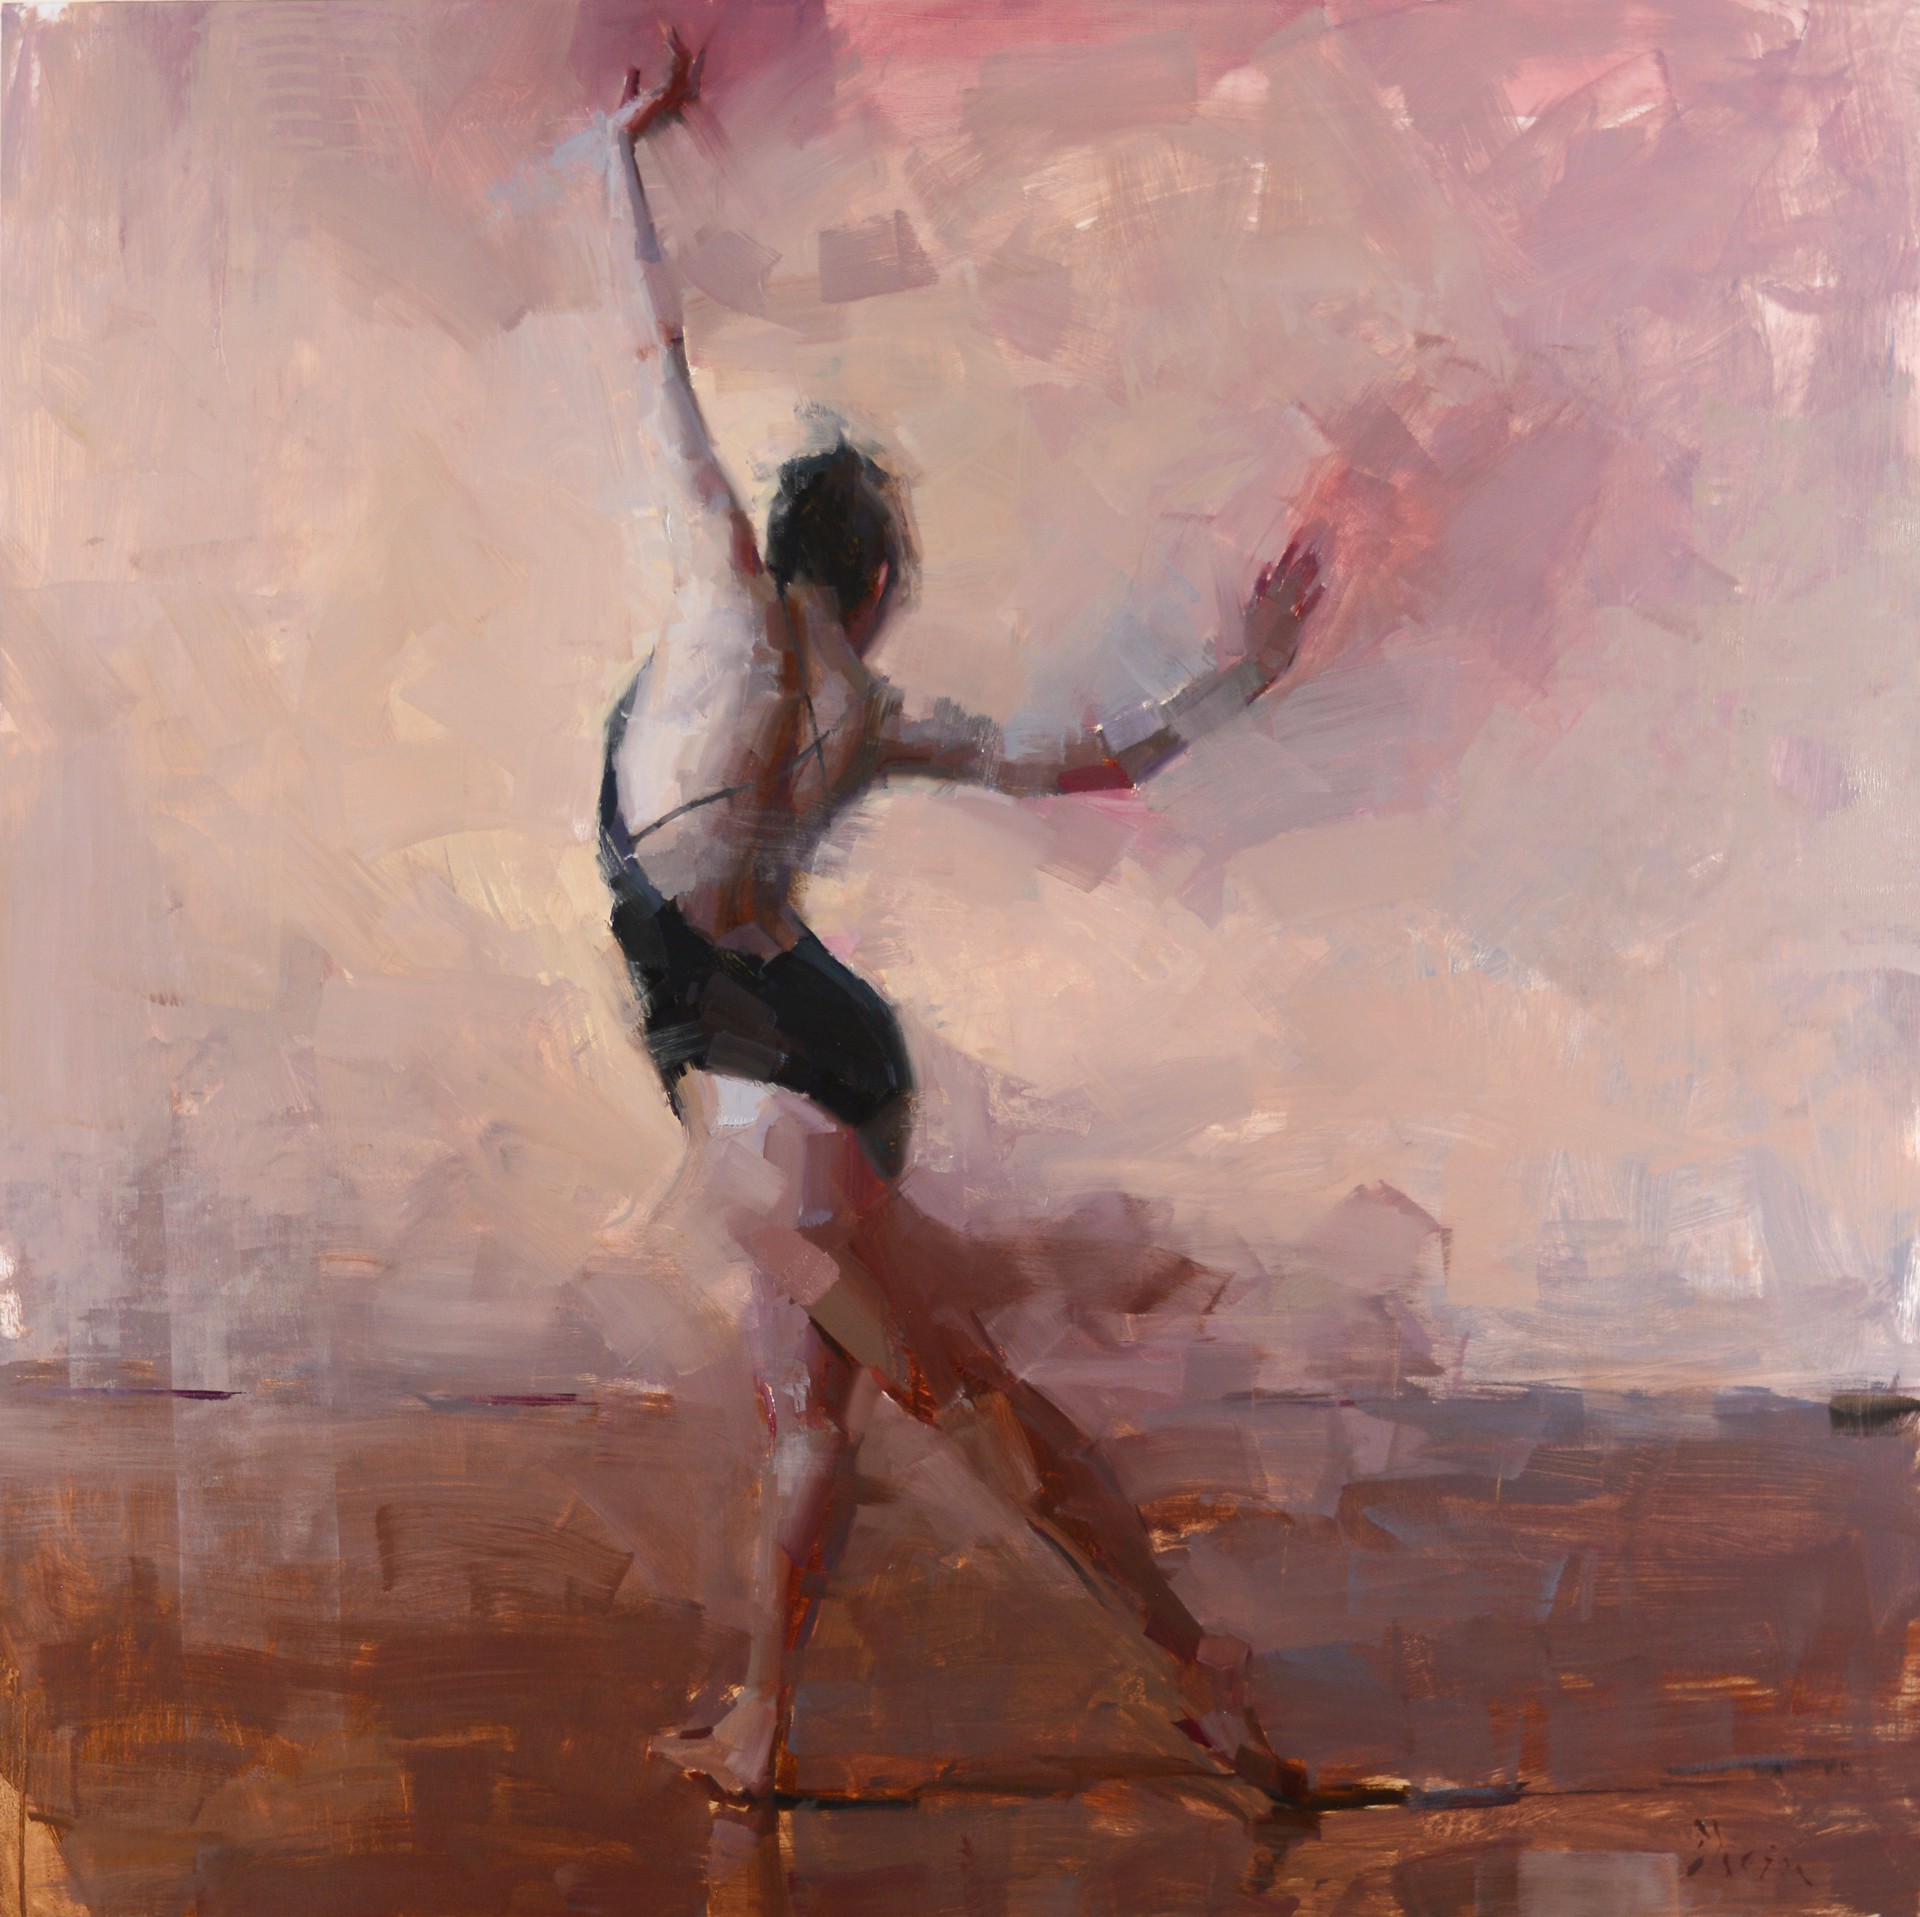 Dancer in Motion by Jacob Dhein